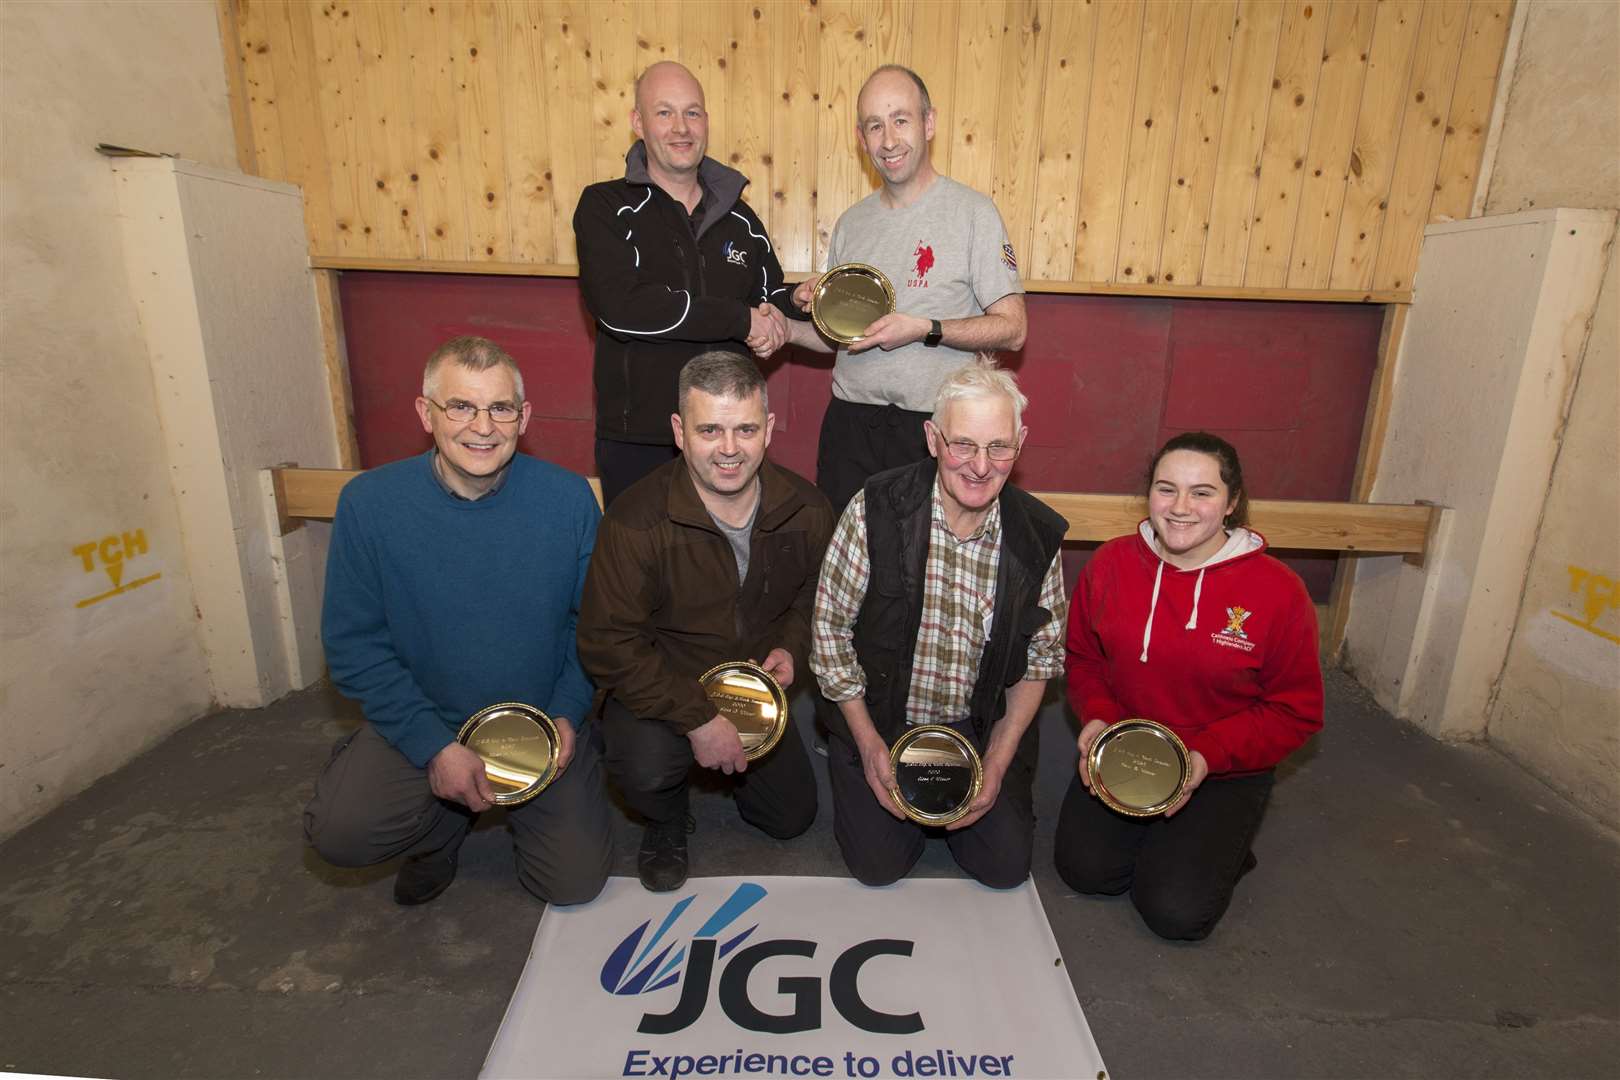 Halkirk Rifle Club held its annual JGC-sponsored open shoot on Tuesday evening. Halkirk shooter Robbie Campbell (back, right) won class X, keeping the main trophy in the club and the family, as he received his cup from his brother John, making the presentation on behalf of JGC Engineering and Technical Services. Winners of classes A to D were (from left) Rogni Brown, Pentland; Gordy Levack, Halkirk; James Manson and Caitlin Green, both Westfield. Picture: Robert MacDonald / Northern Studios